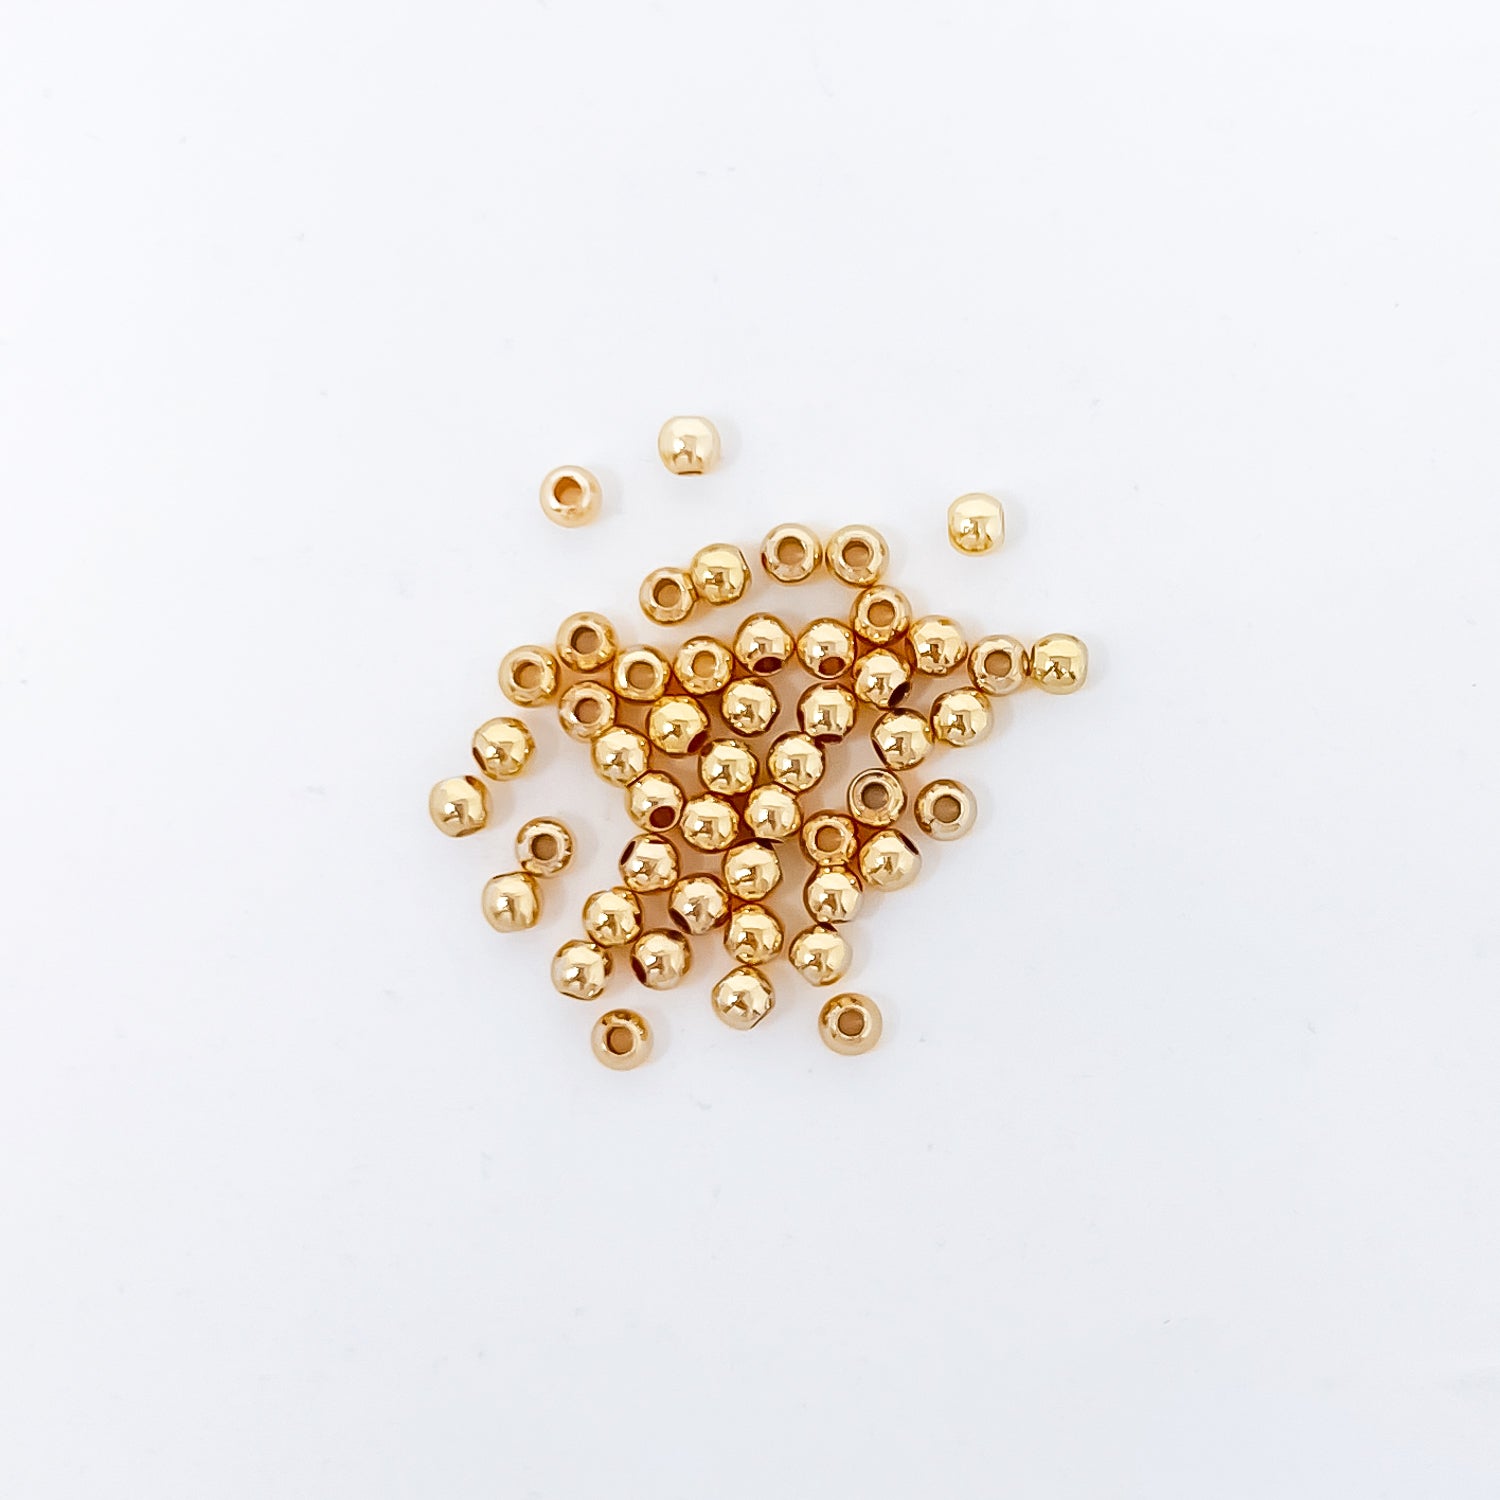 14K Gold Plated Spacer Beads – The Neon Tea Party